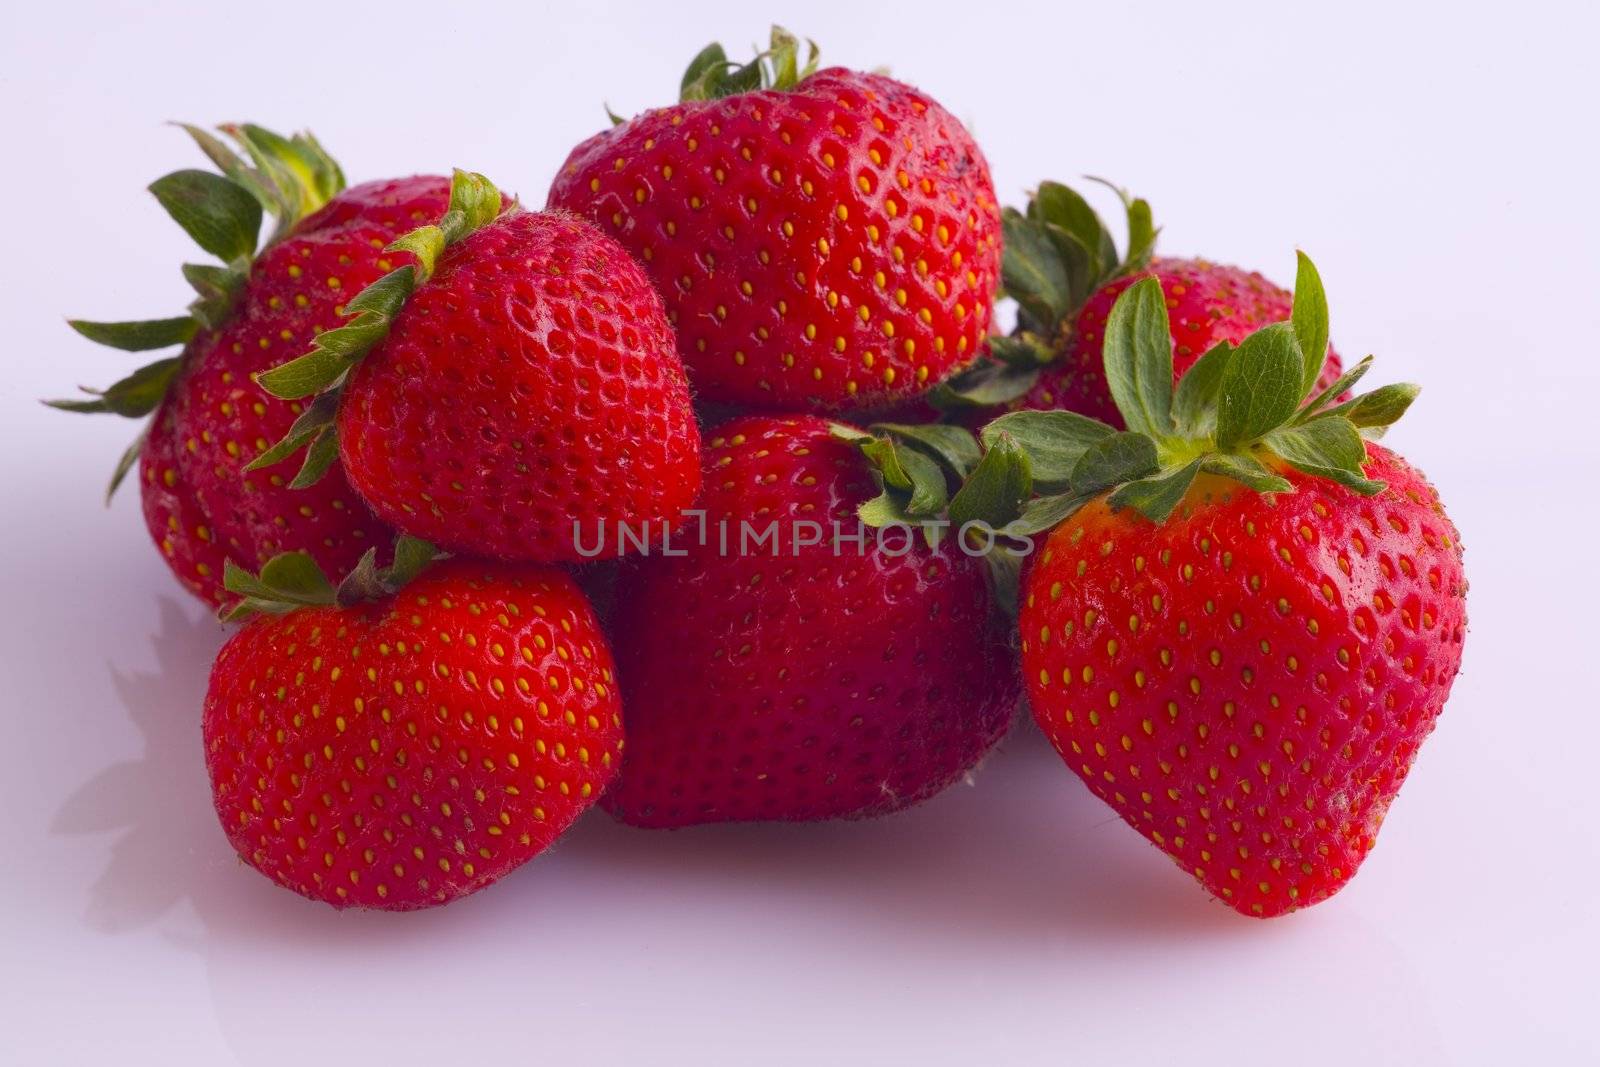 Strawberries red, plump, and juicy, in a small pile on a white background.